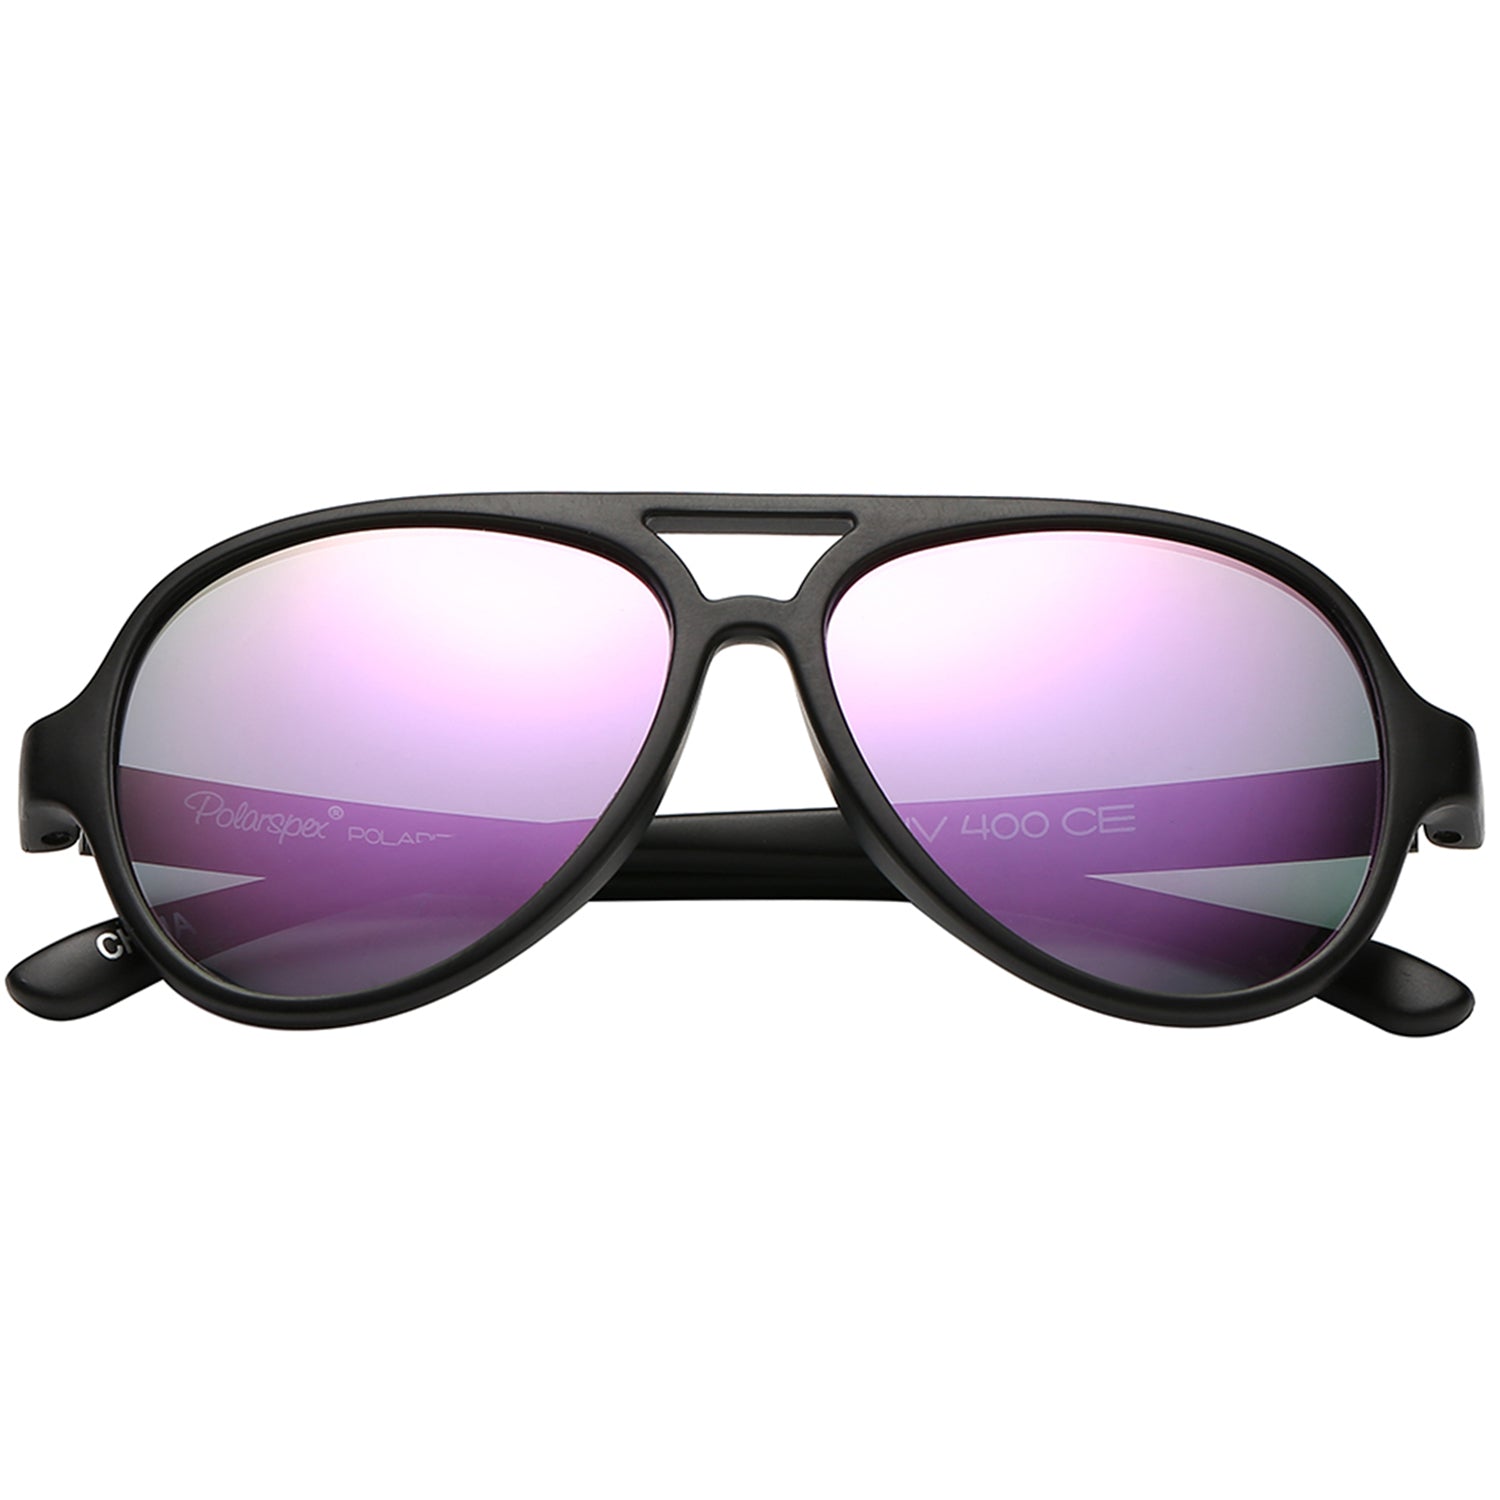 Polarspex Polarized Bendable Aviator Pilot Sunglasses with Matte Black Frames and Polarized Amethyst Lenses for Boys and Girls (Ages 2 - 8)